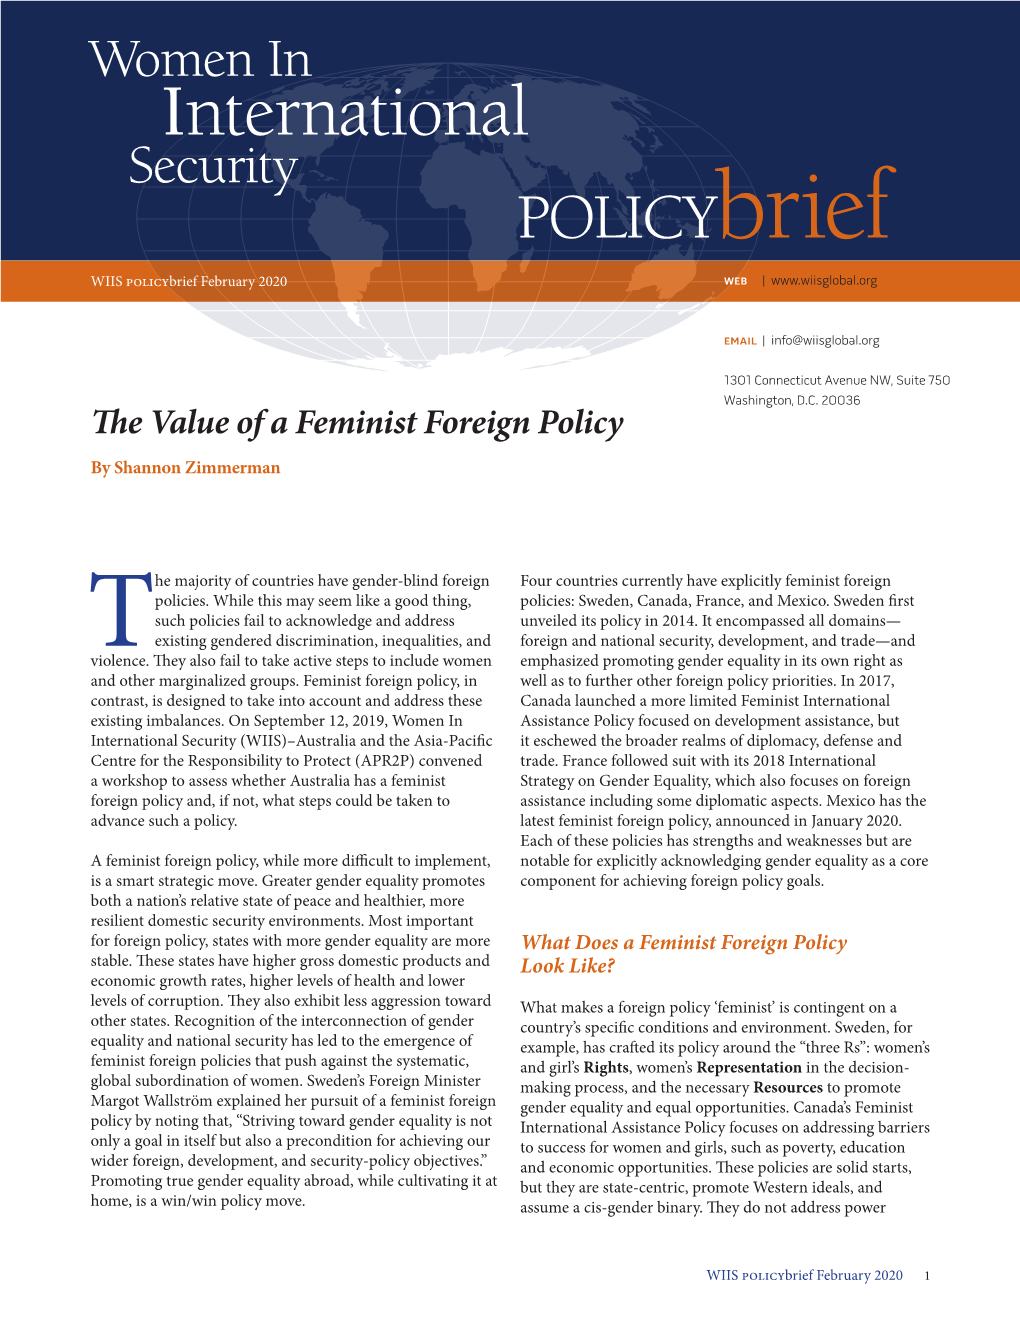 The Value of a Feminist Foreign Policy by Shannon Zimmerman